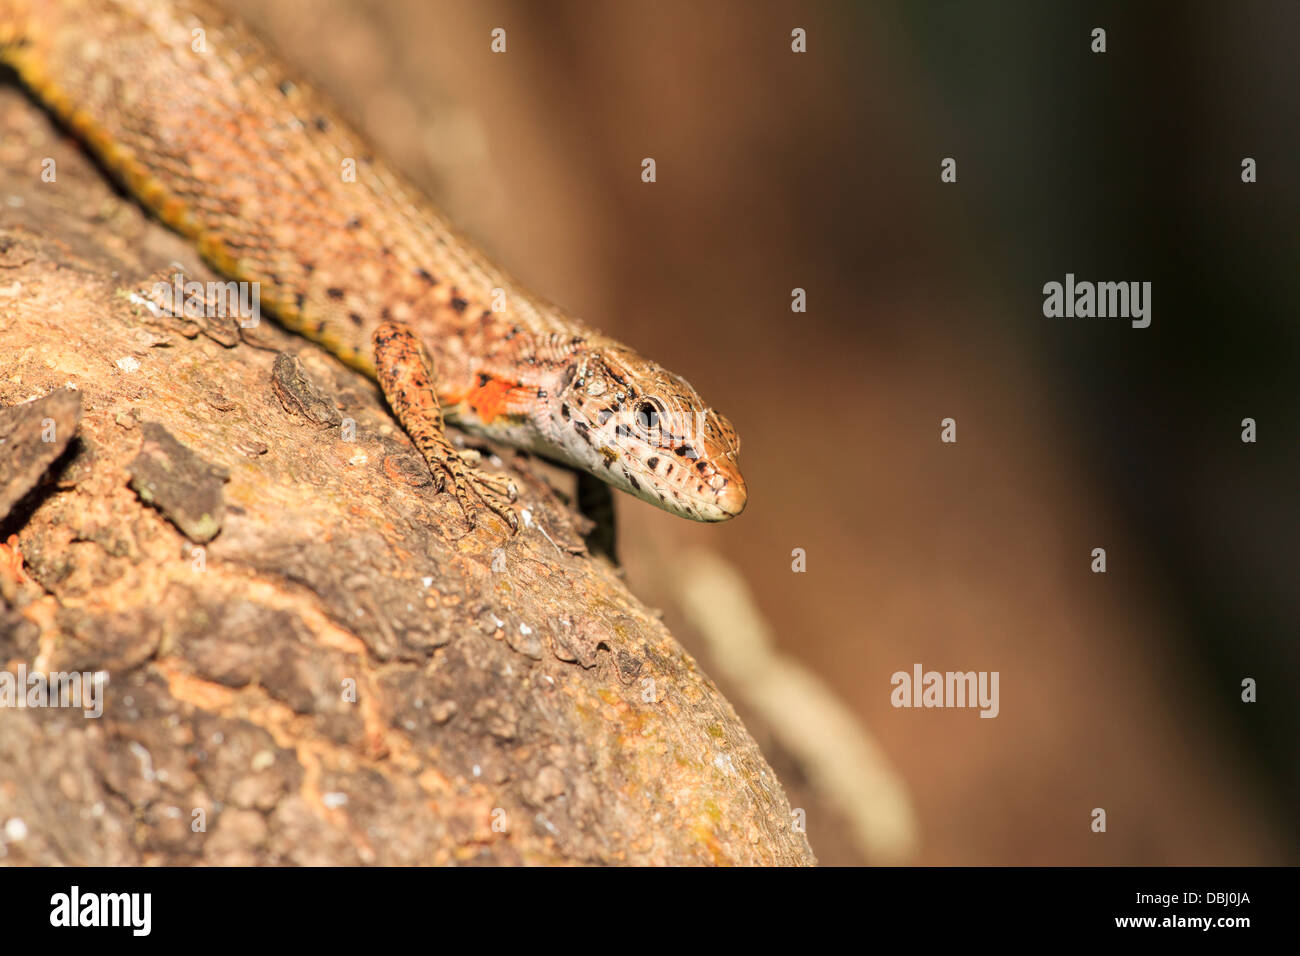 A small lizard of the Algyroides species on a log in Corfu Greece Stock Photo